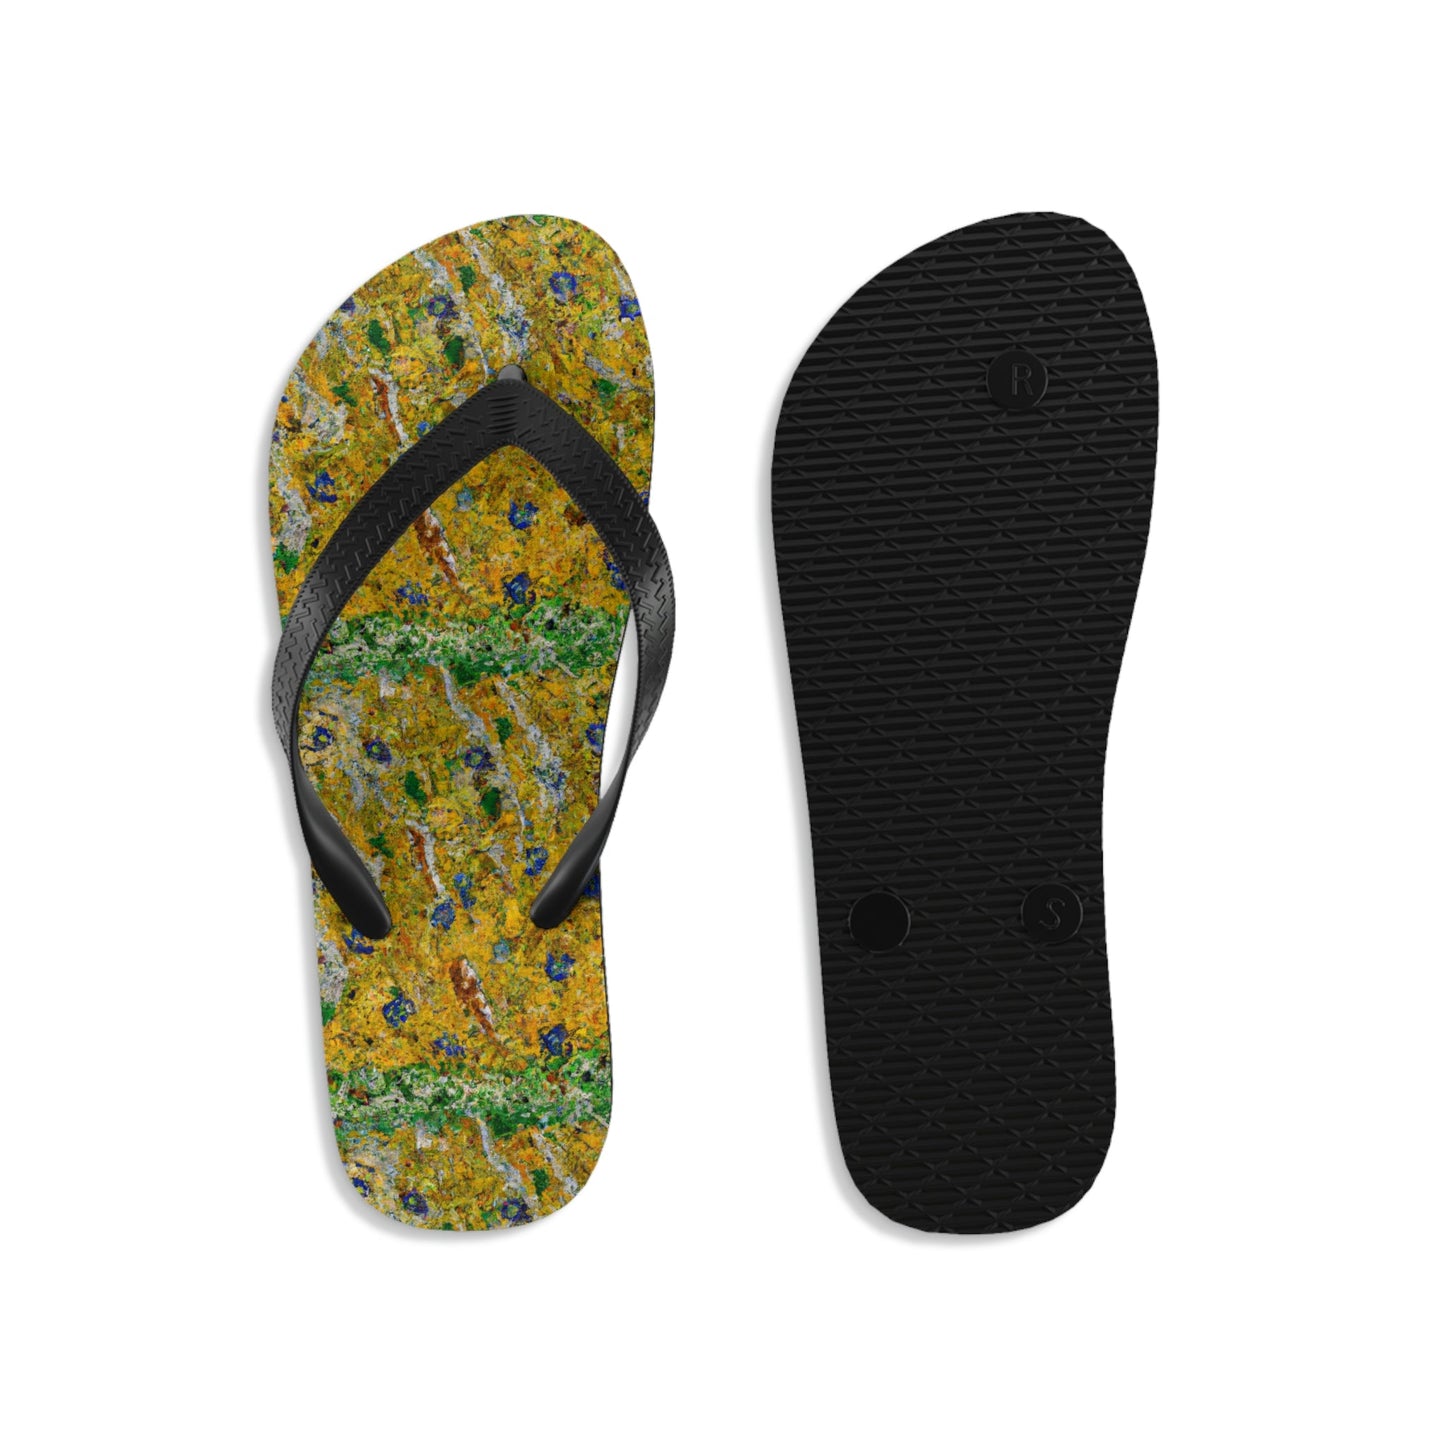 Shoes - Unisex Flip-Flops Summer Time Yellow Flower Oil Painting